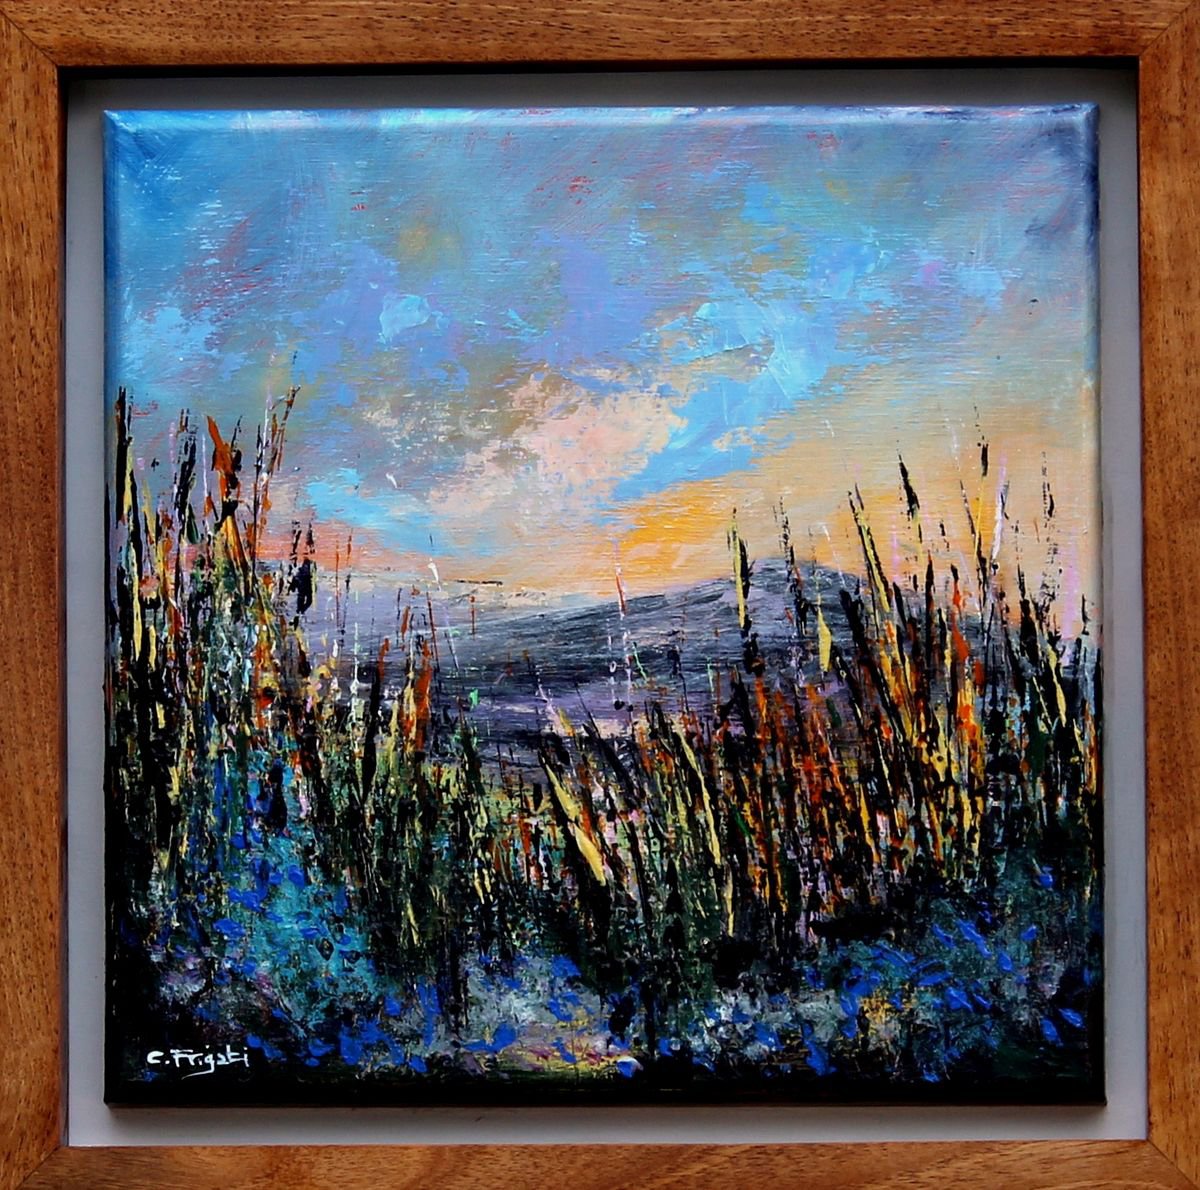 Lost In Thoughts #9 - Framed Semi Abstract Landscape by Cecilia Frigati